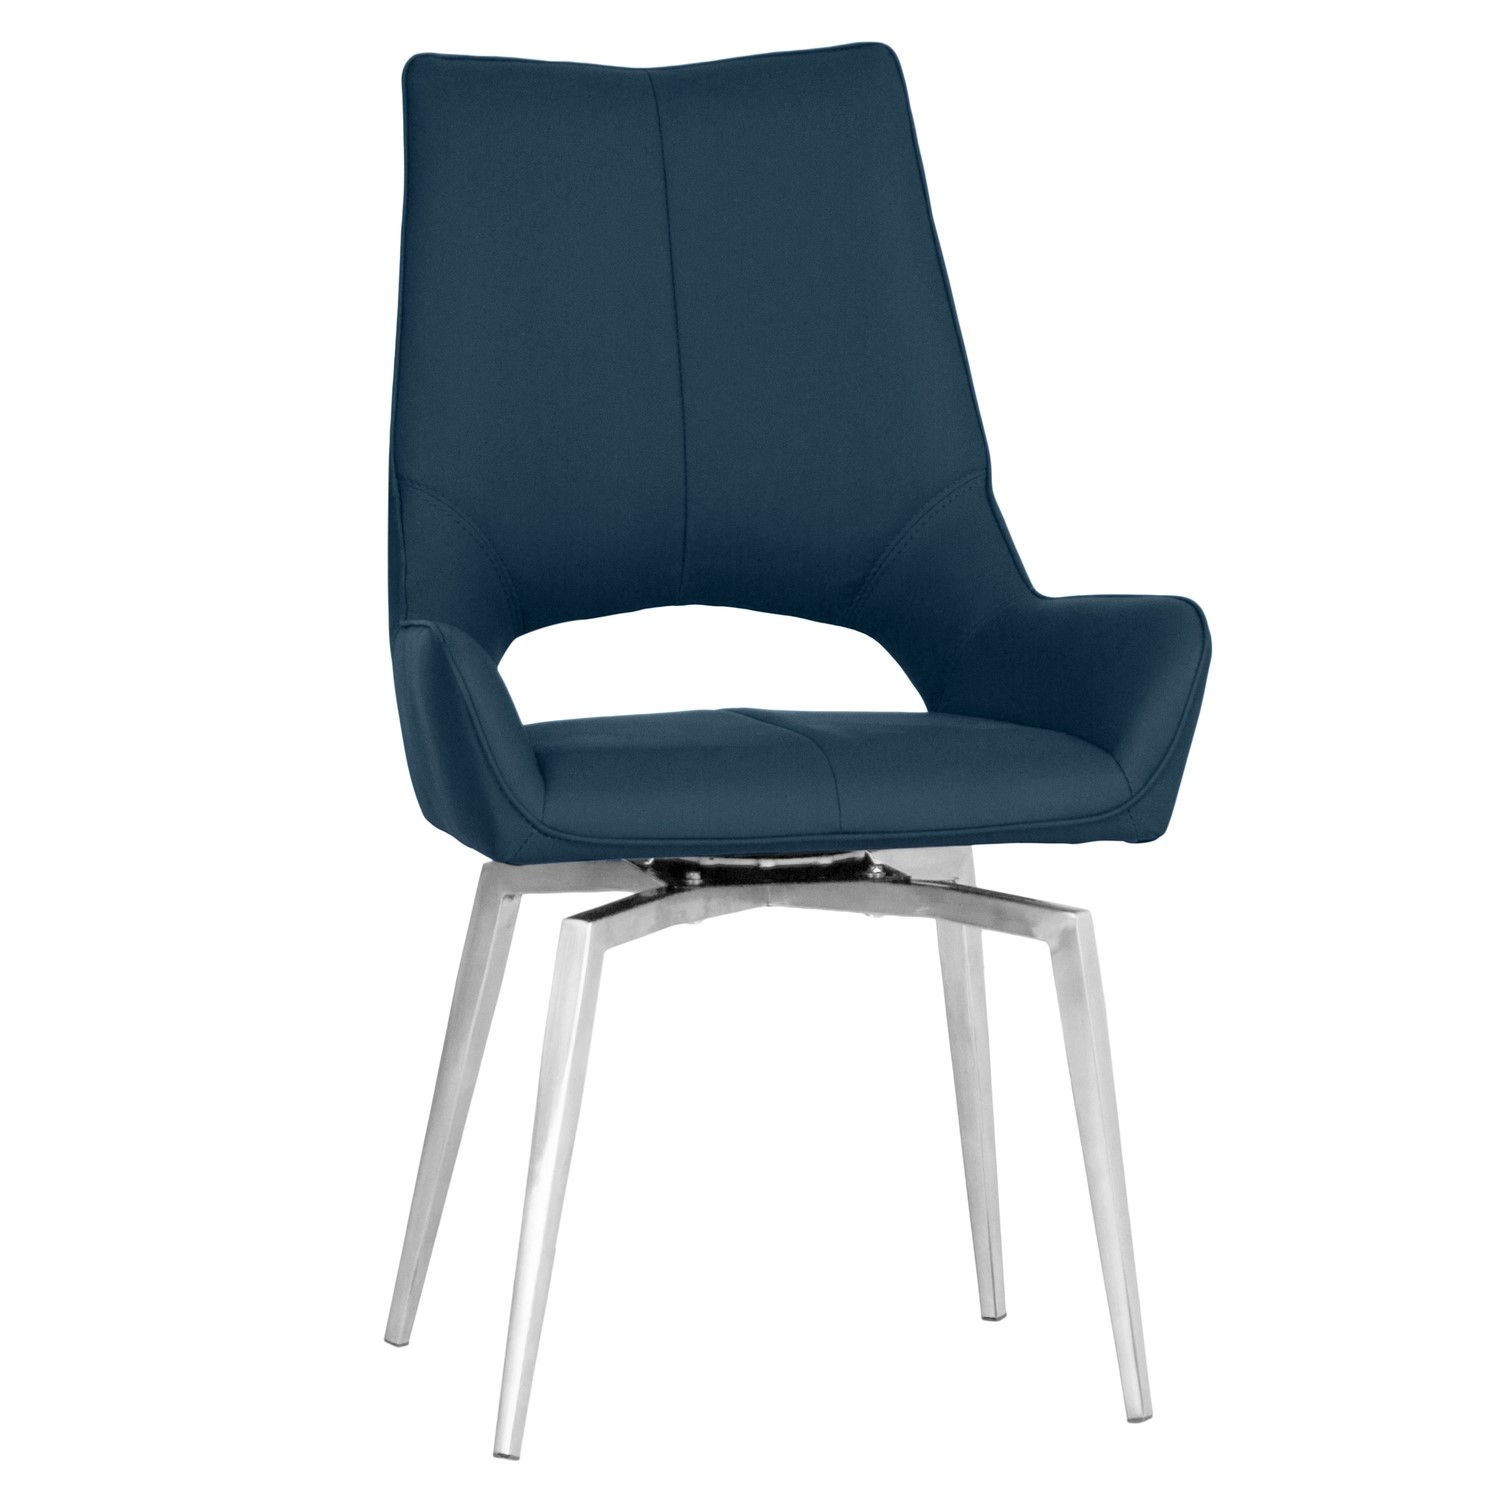 Read more about Revel set of 2 swivel dining chairs blue